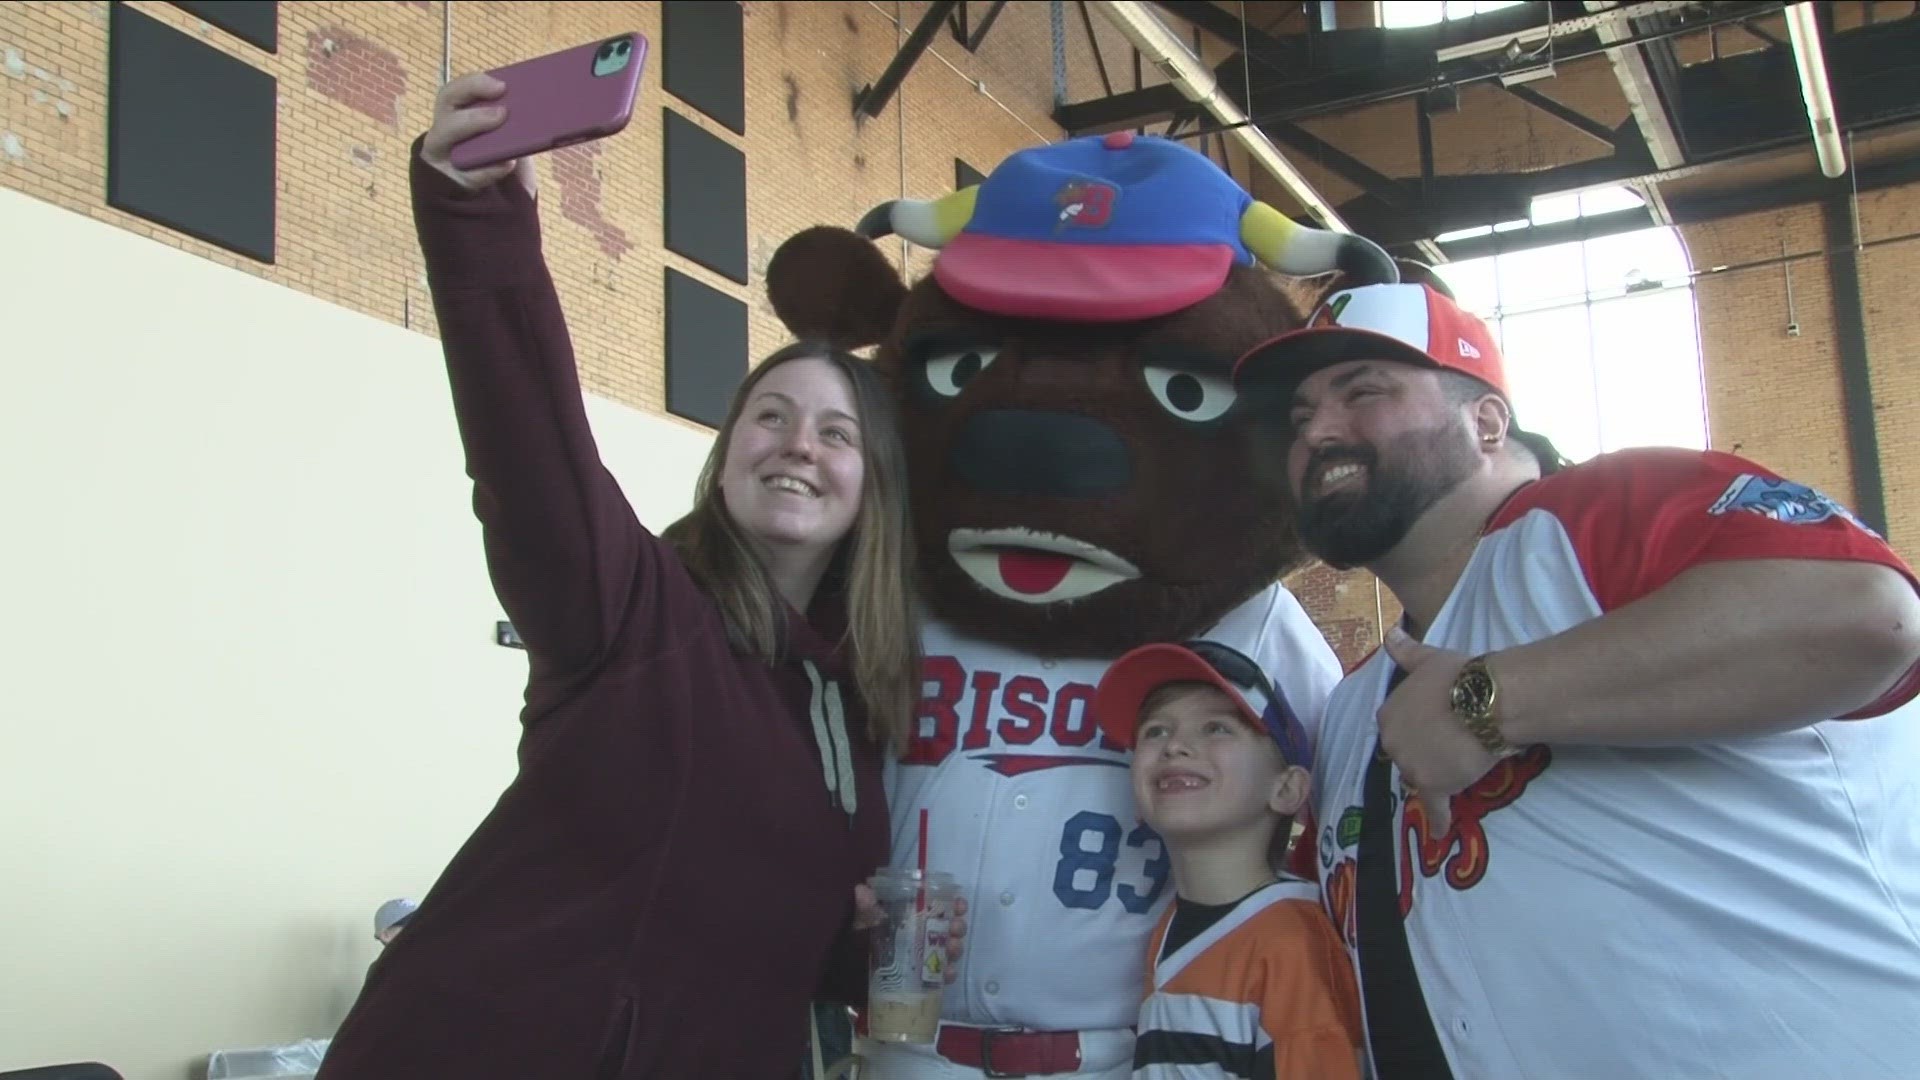 There were activities, games, and a jersey auction. Fans were able to purchase tickets for opening day on March 29 with a $5 donation to charity.